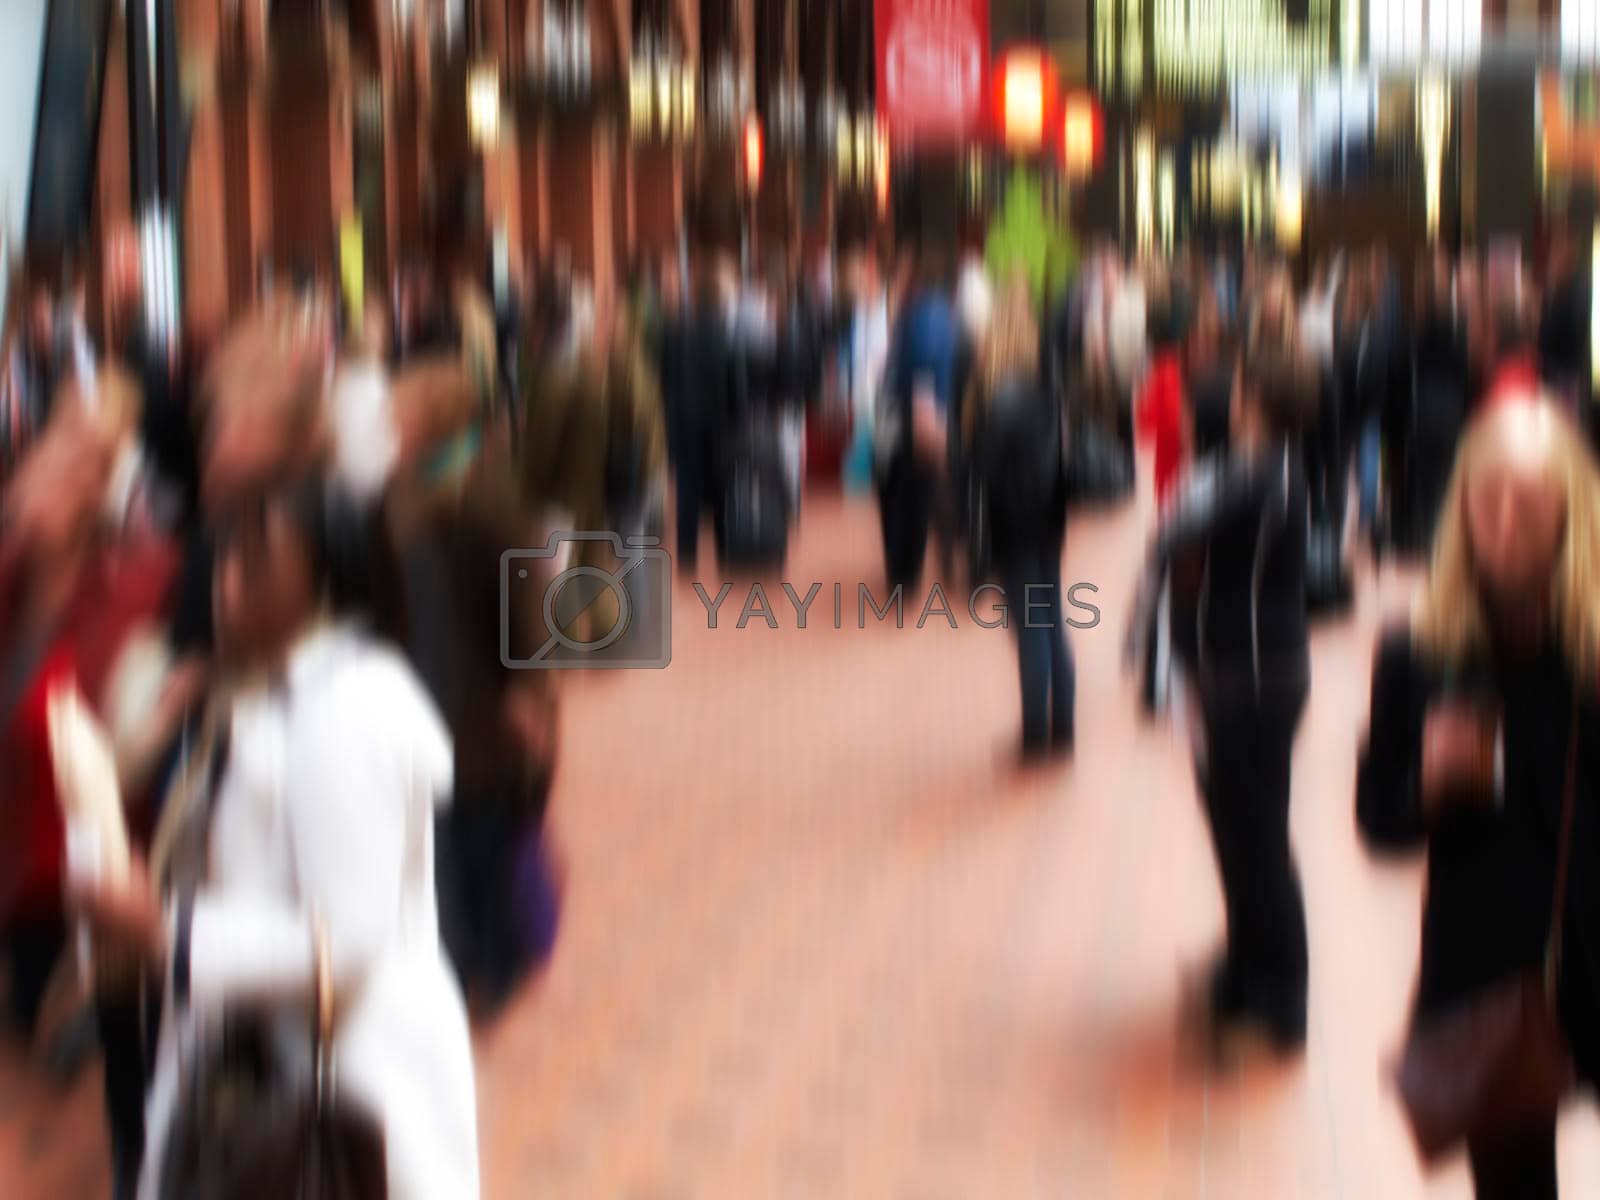 Royalty free image of Motion blurred city life. Motion and lens blurred photo of city people. by YuriArcurs